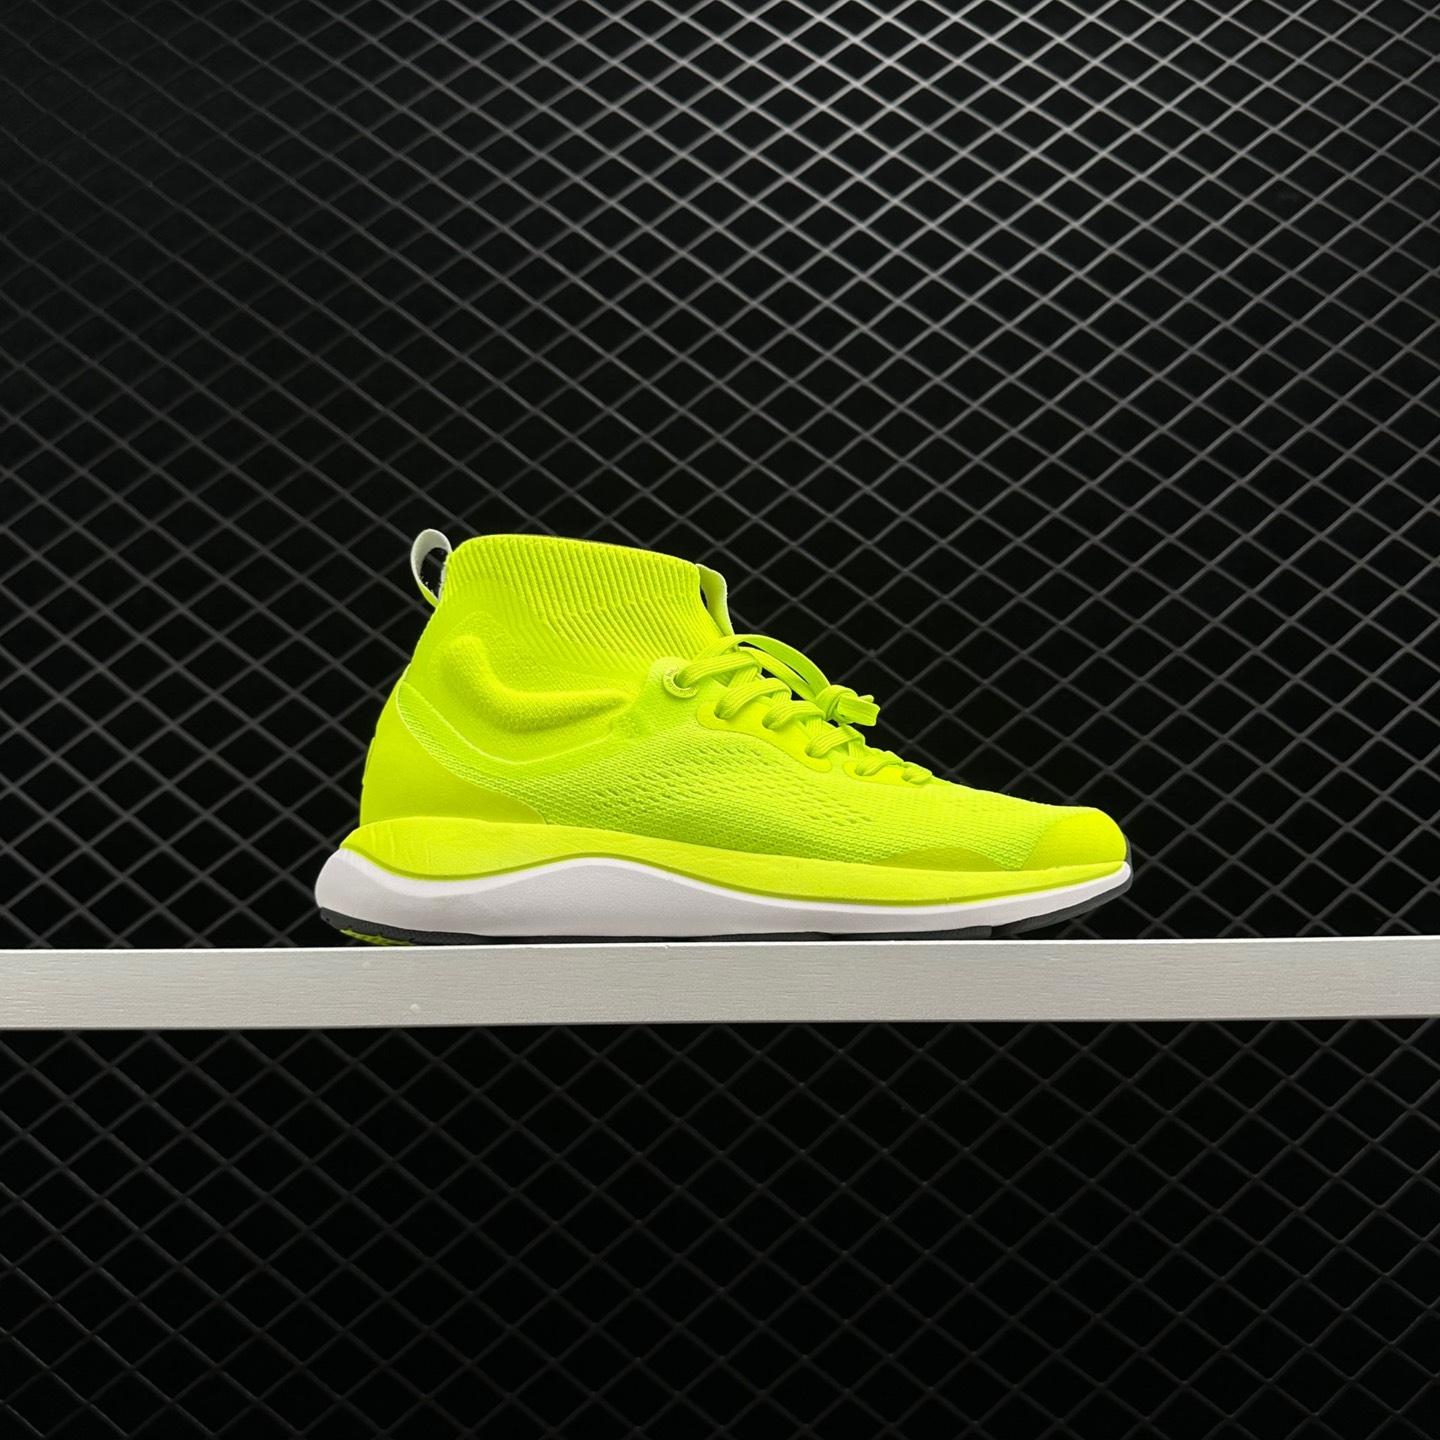 Lululemon Chargefeel Mid Workout Shoes - Yellow & Highlight Green | Top Performance Footwear